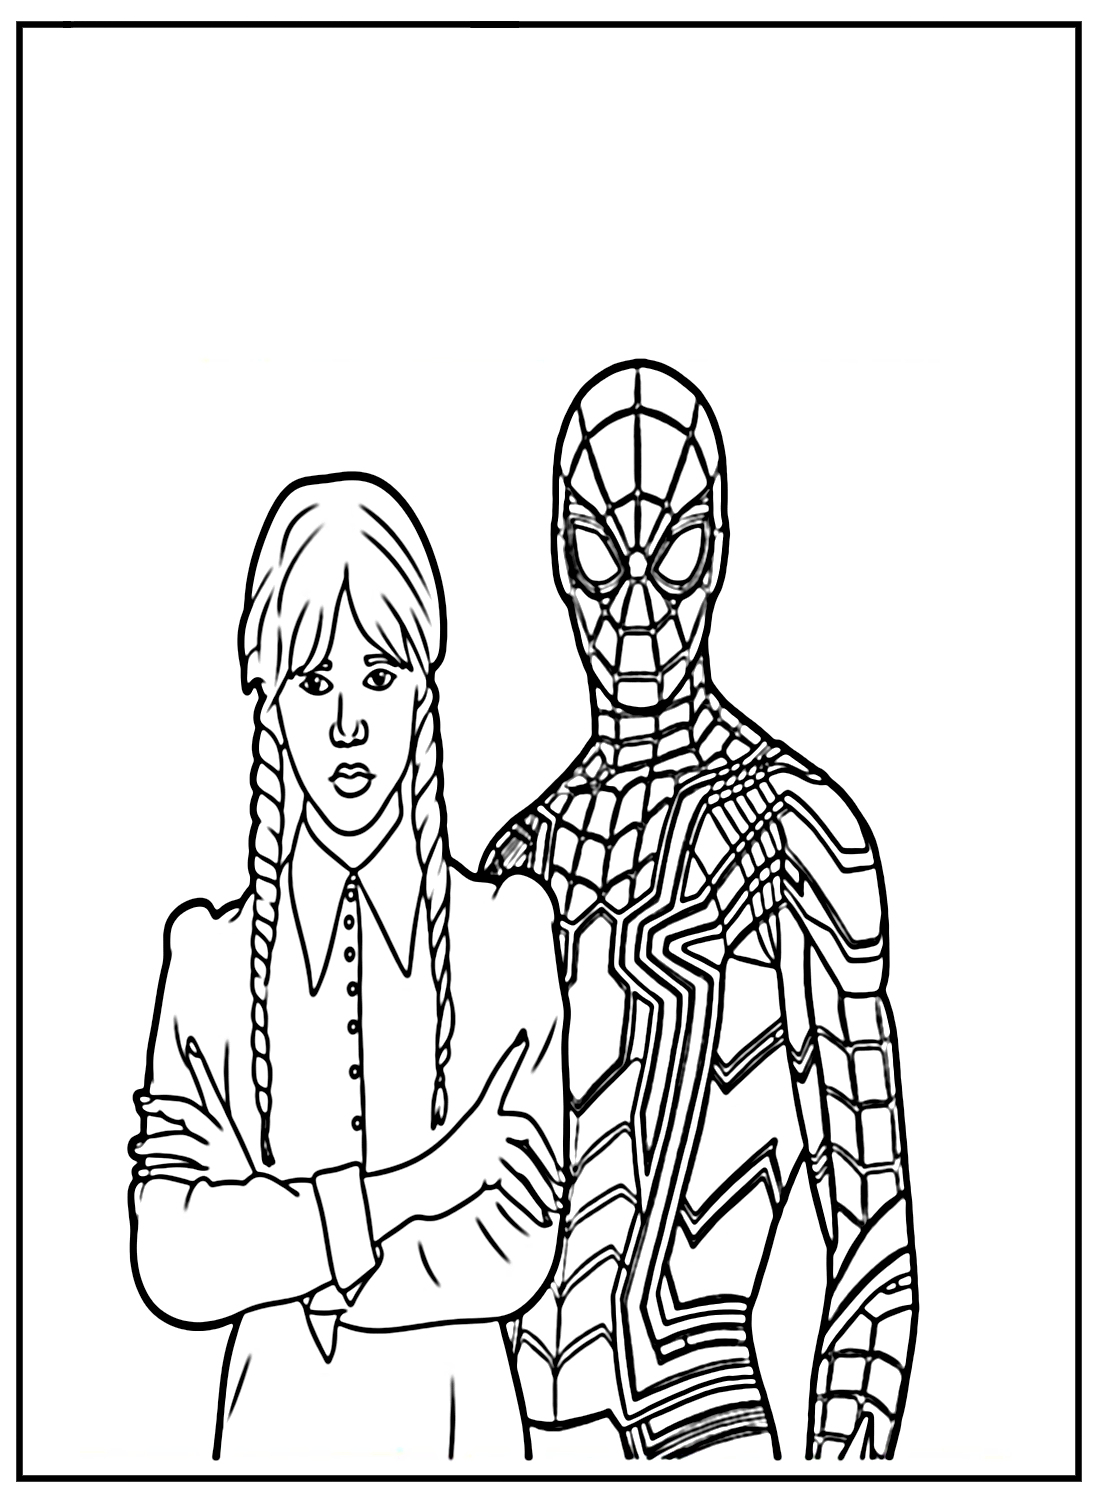 Wednesday Addams with Spider Man from 